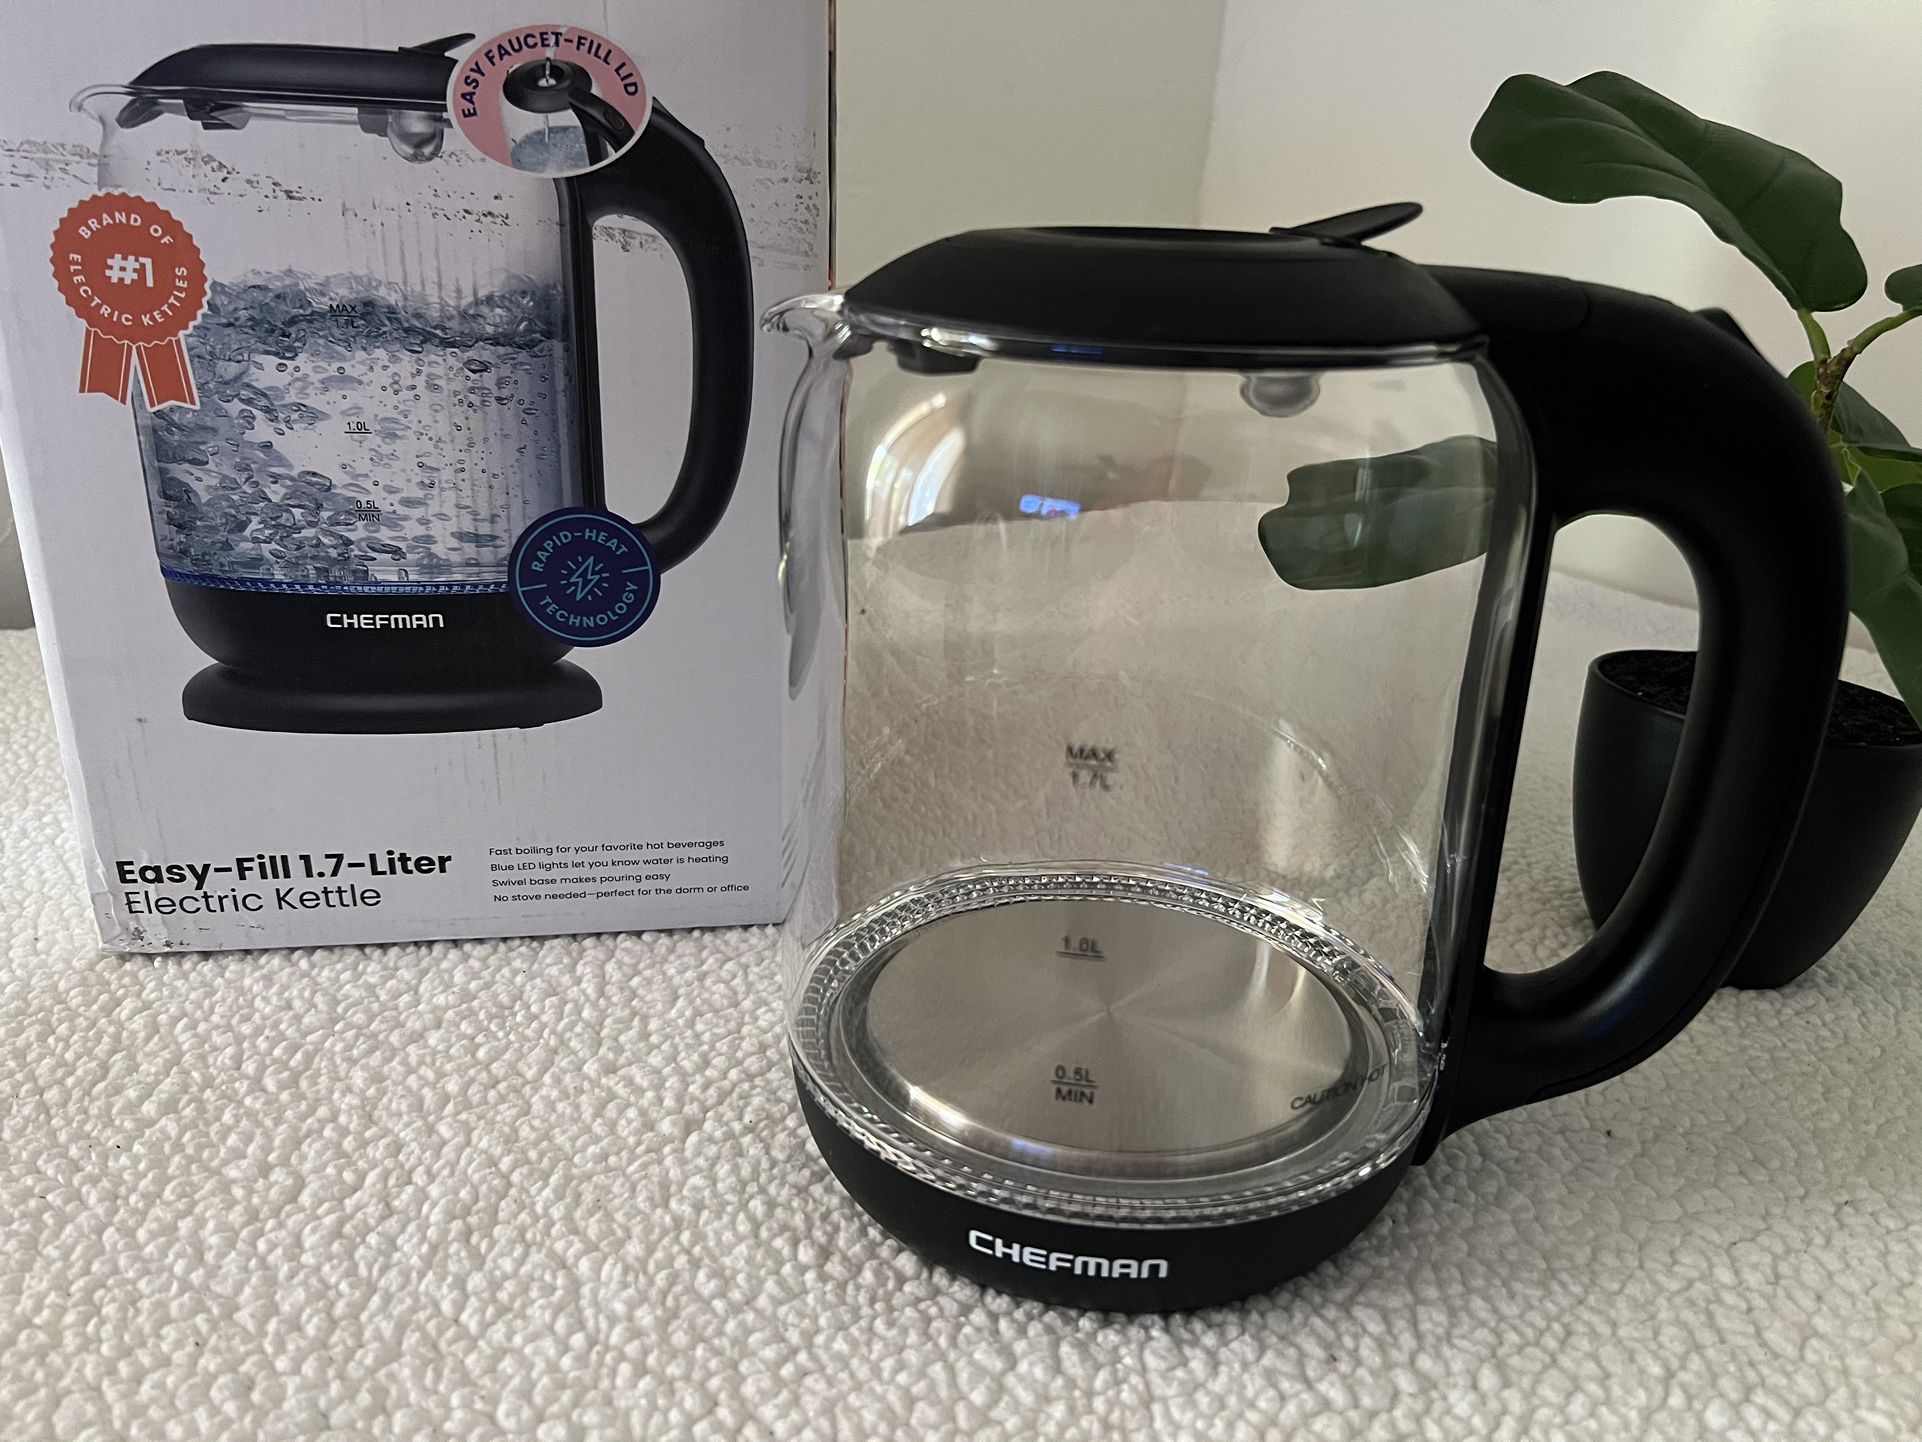 Chef man Electric Kettle 